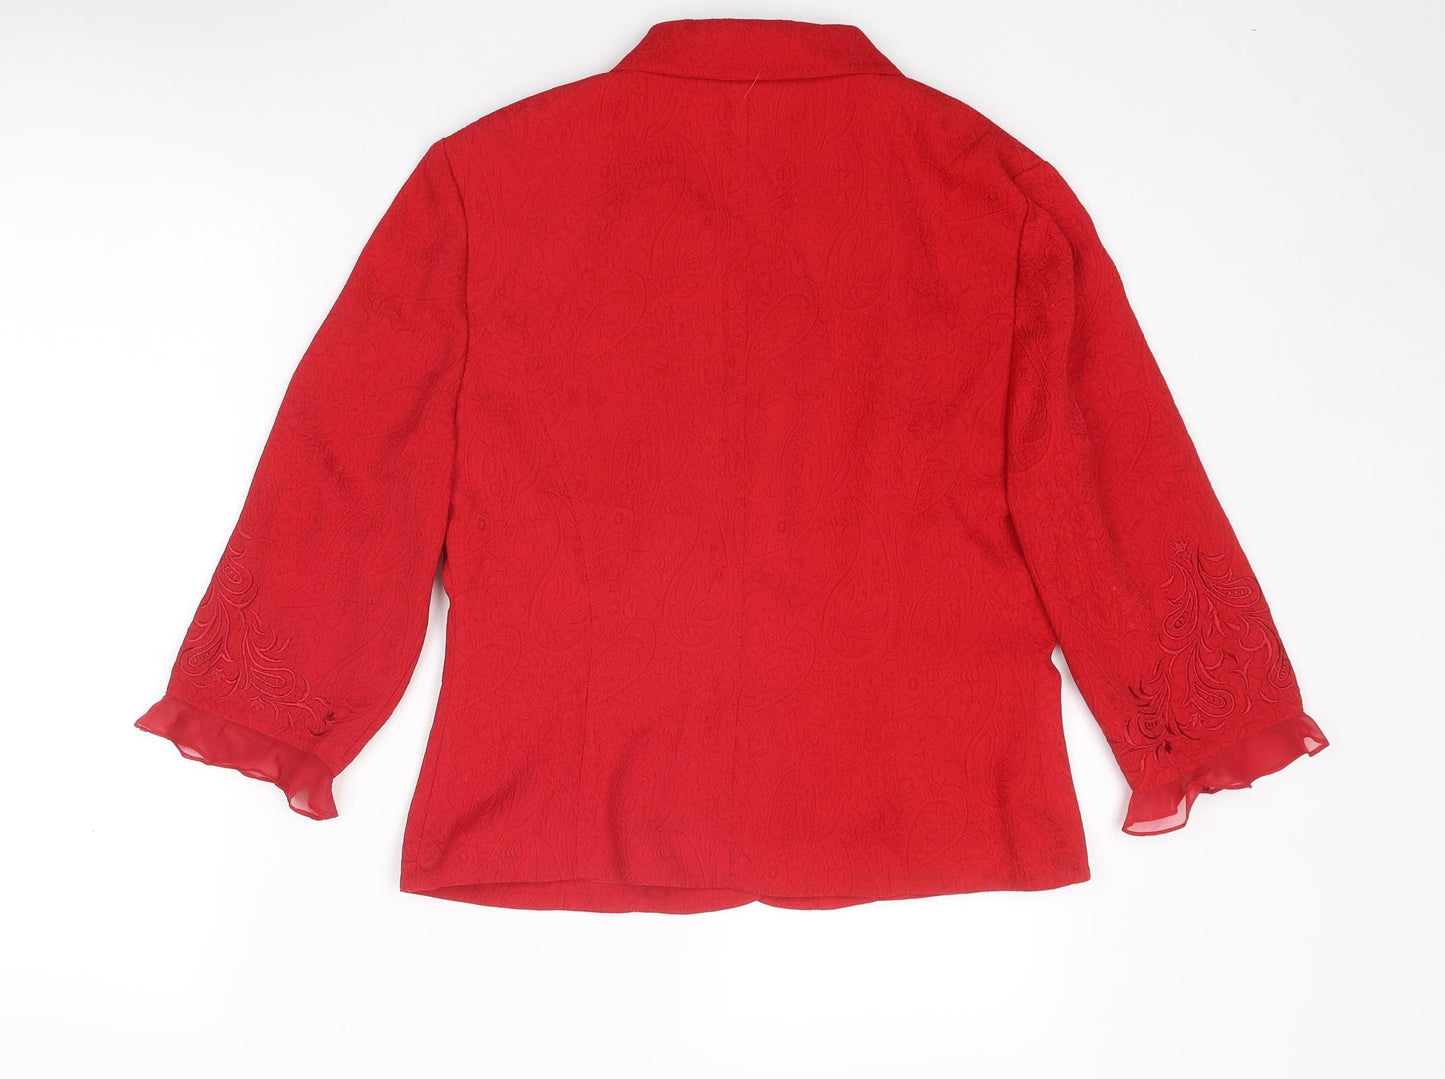 Plaza South Womens Red Jacket Blazer Size 8 Button - Textured